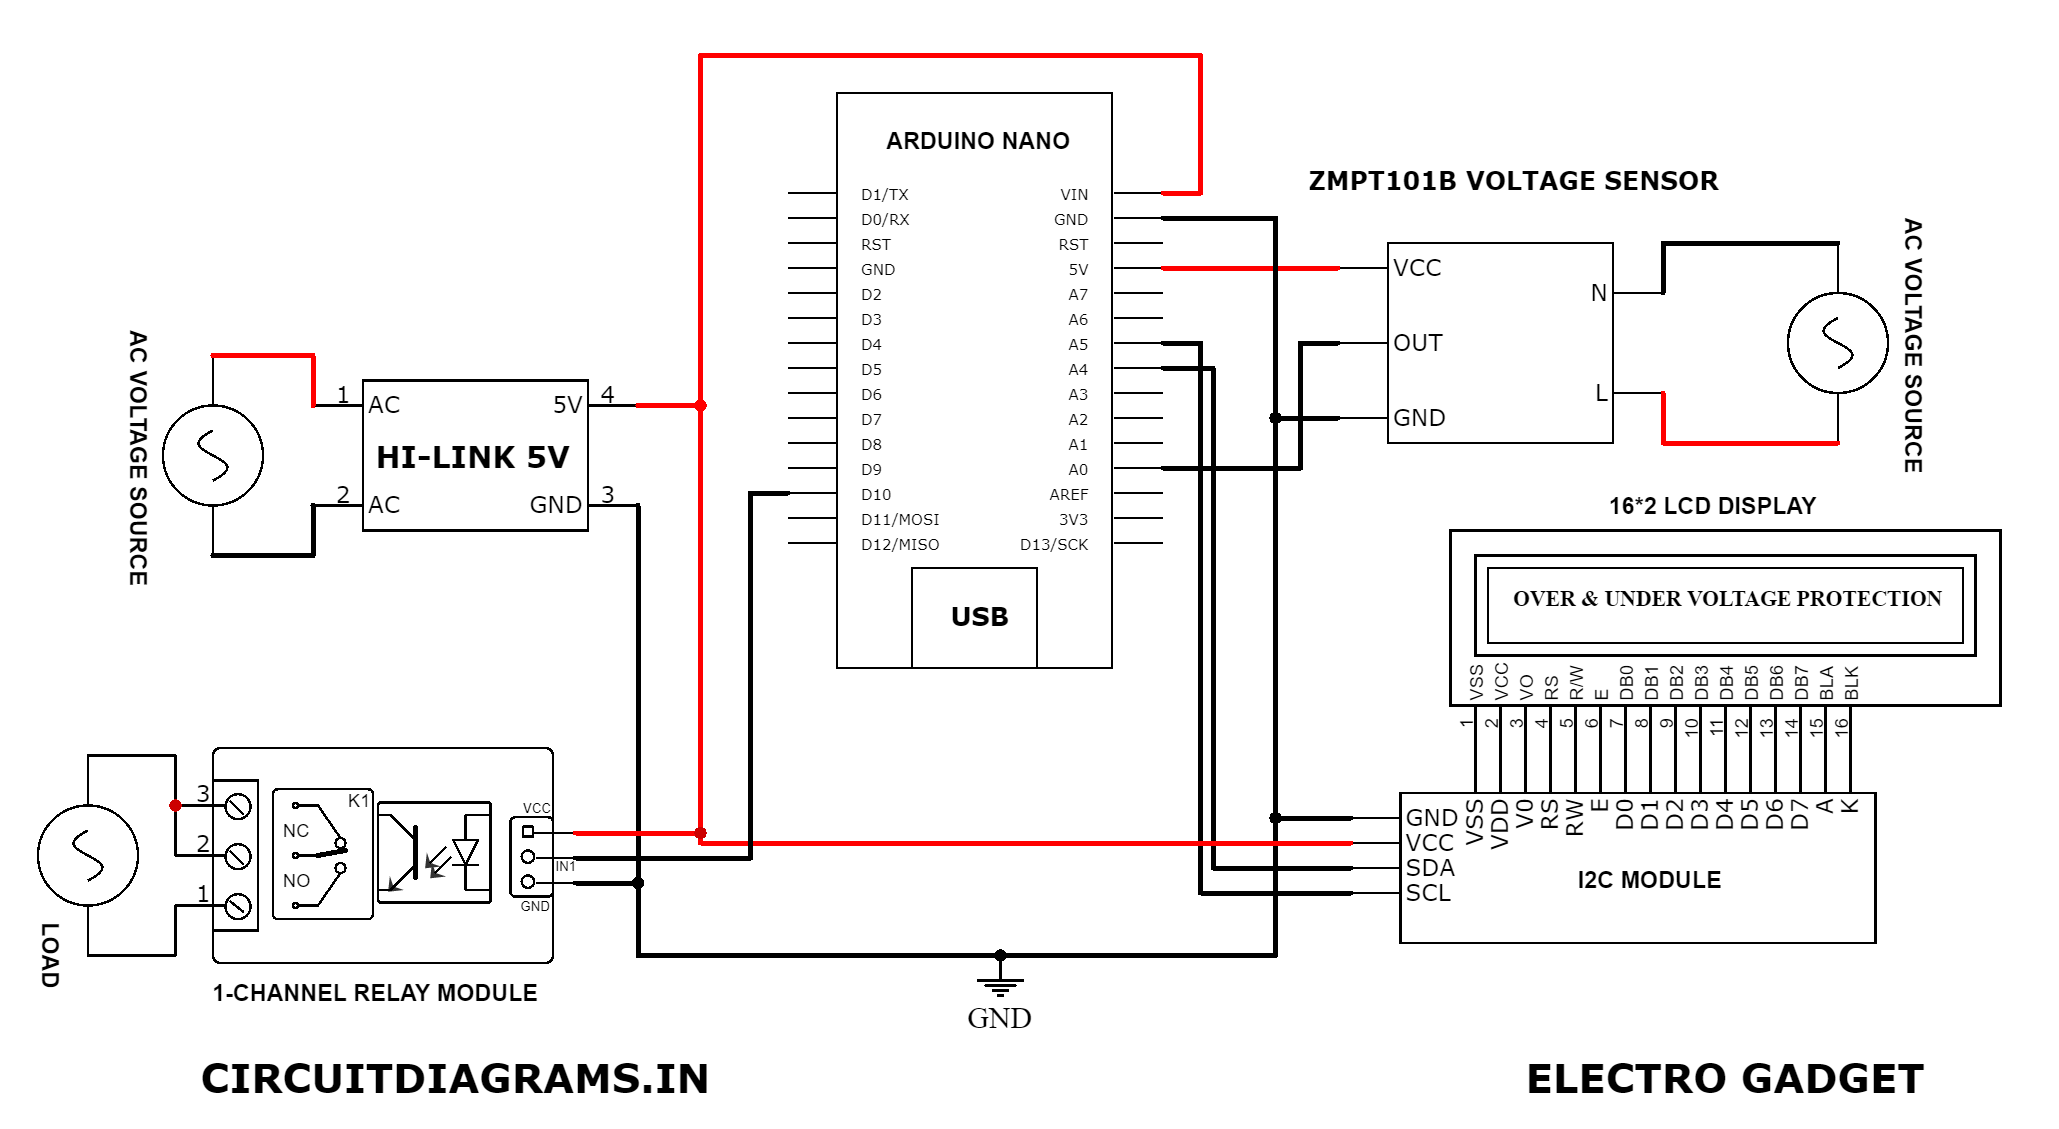 230V AC Mains Over Voltage Protection Circuit Diagram